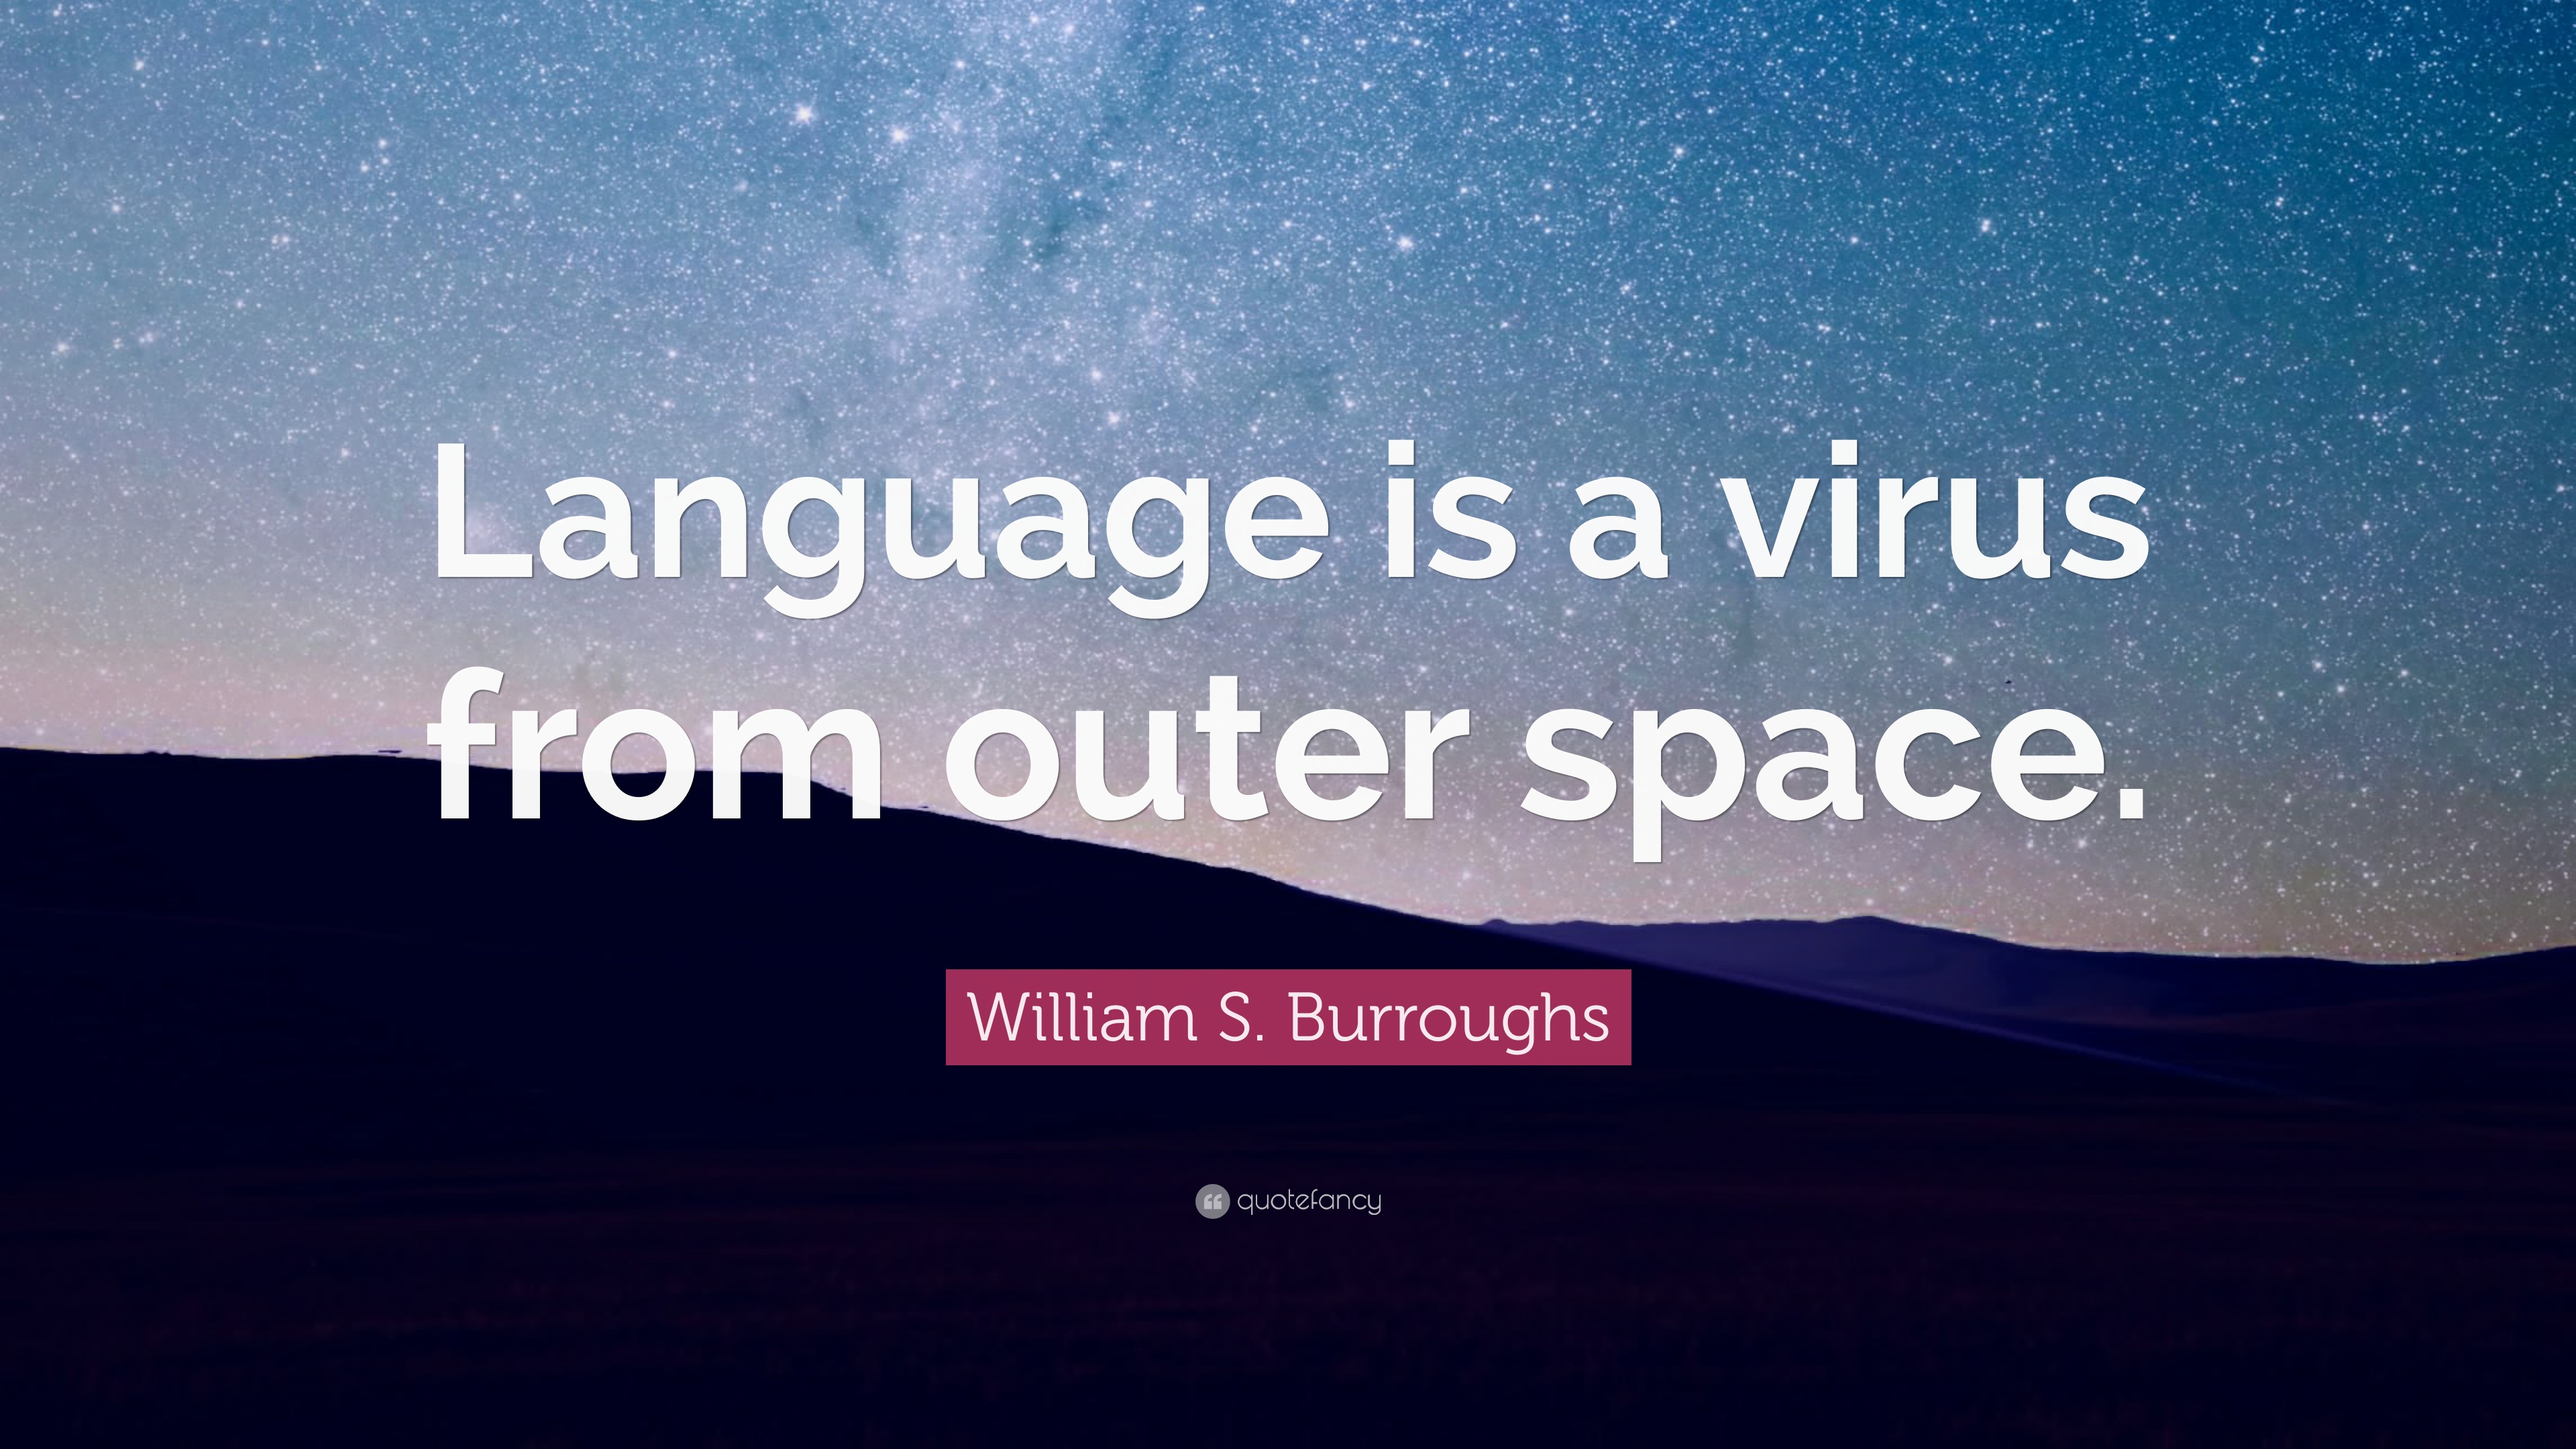 William S. Burroughs Quote: “Language is a virus from outer space